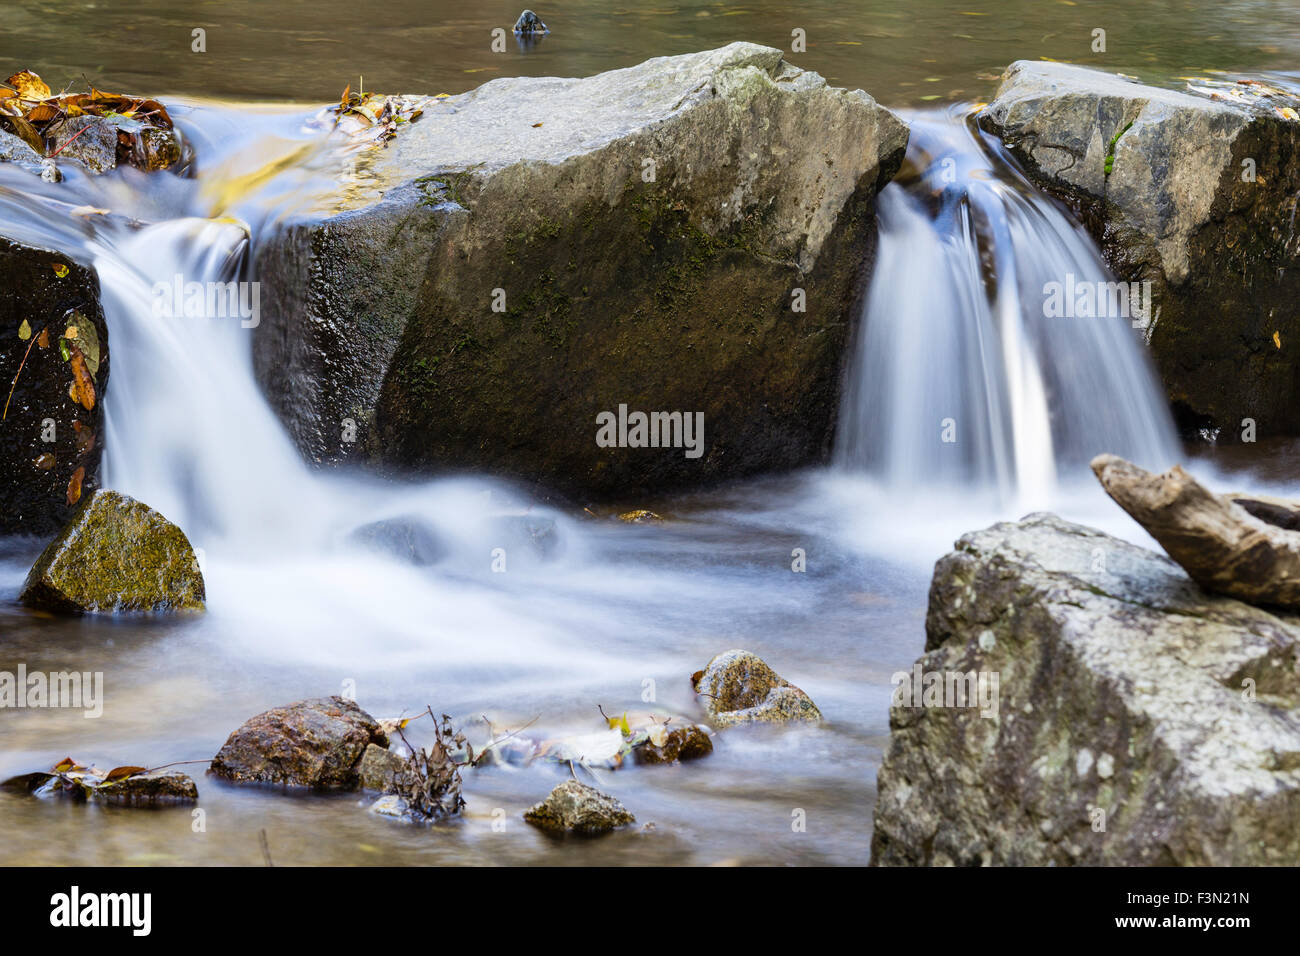 Kobe, Japan. River from Nunobiki falls, flowing over row of rocks making miniature waterfalls. Autumn, trapped leaves in water and on rocks. Stock Photo